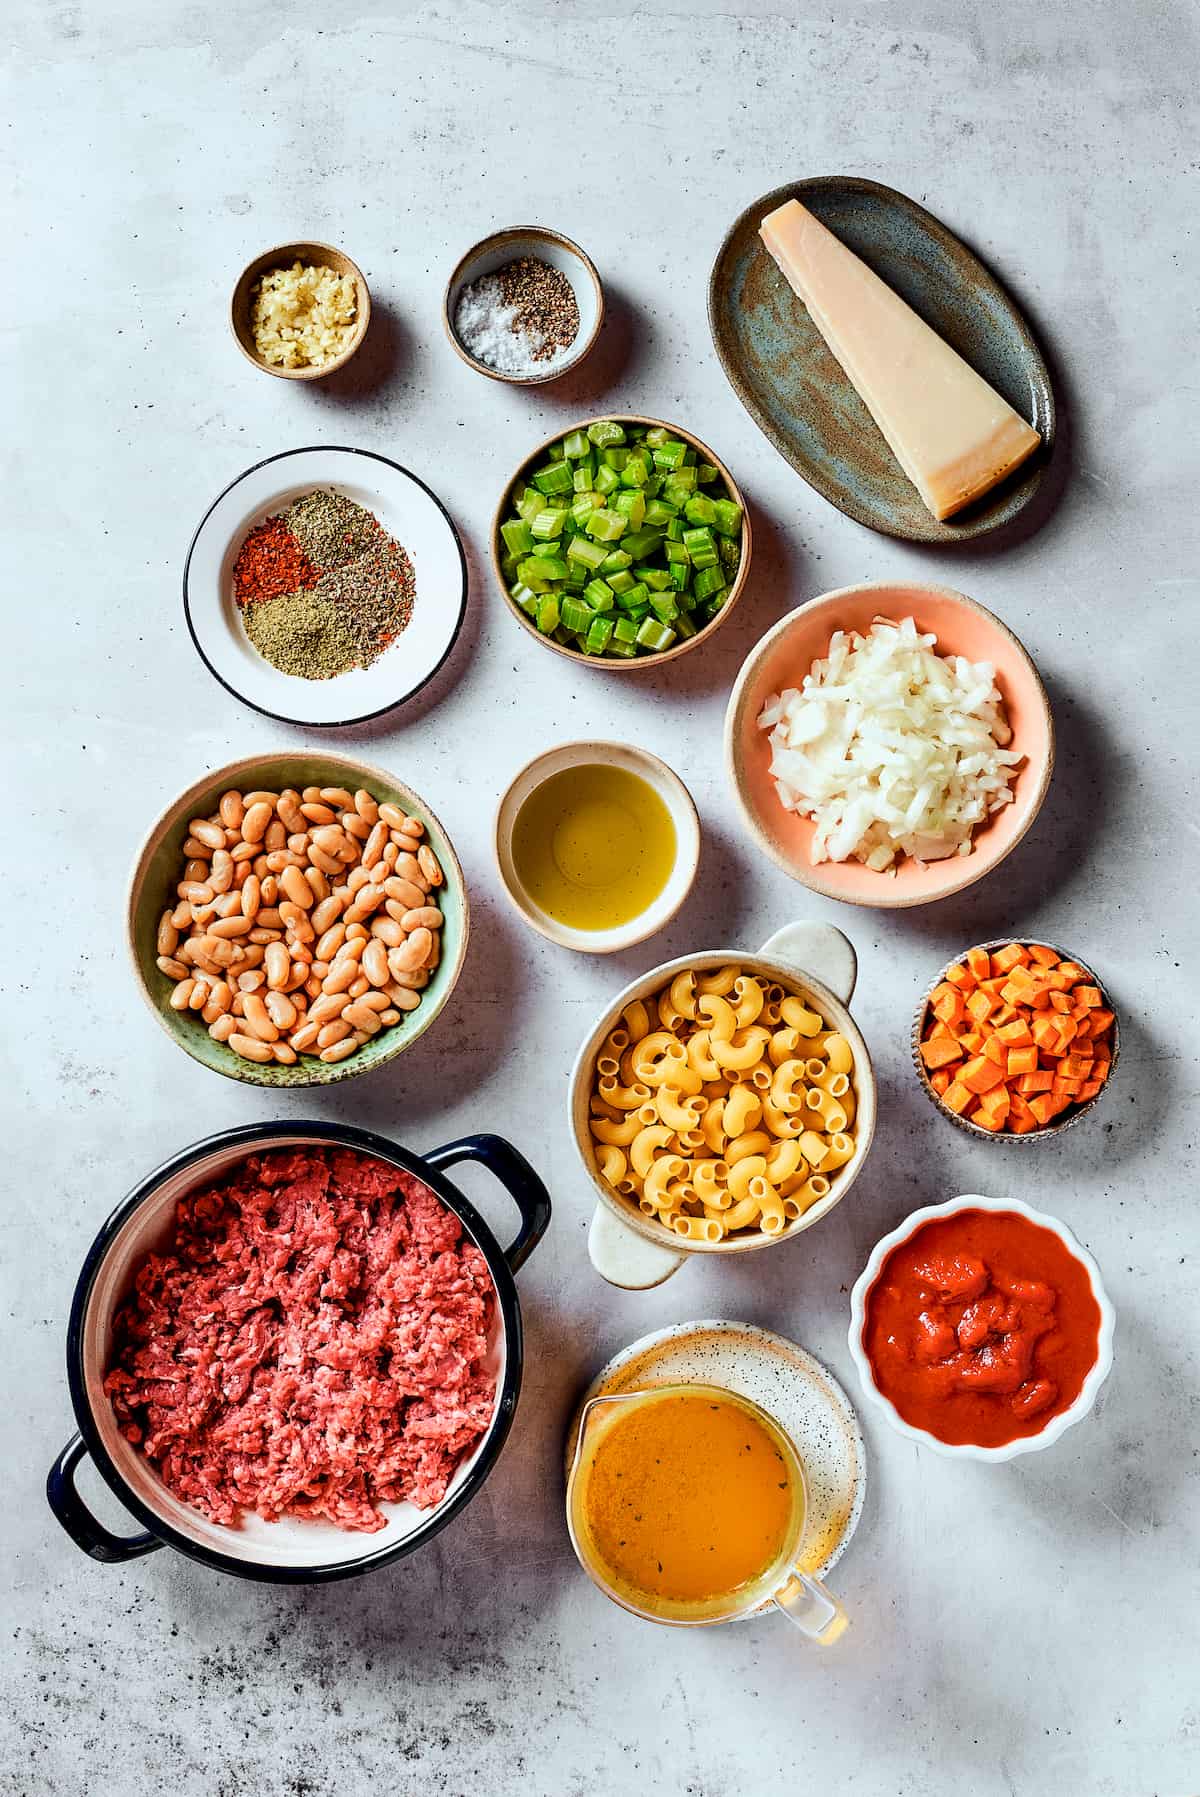 Ingredients needed to make pasta fazool are shown portioned out on a white background: celery, carrots, pasta, meat, beans, tomatoes, garlic, onion, broth, herbs, and salt and pepper.